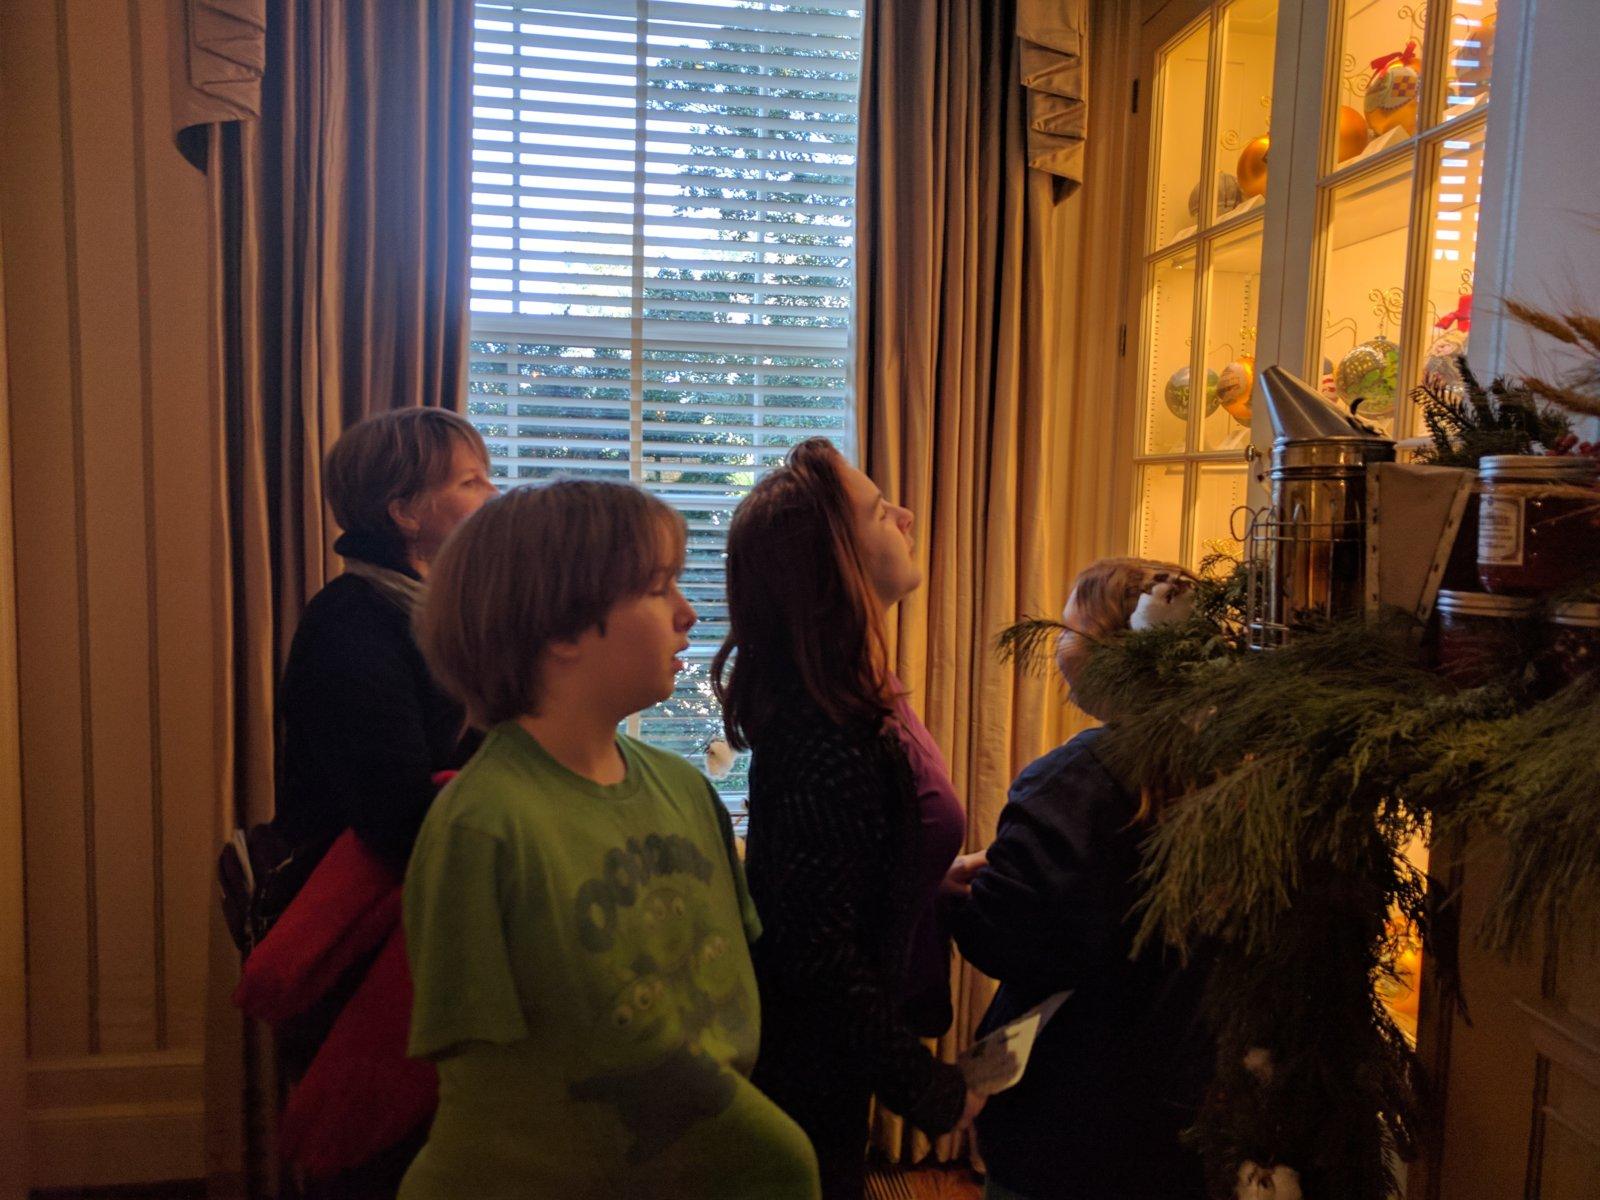 Looking at the ornaments.